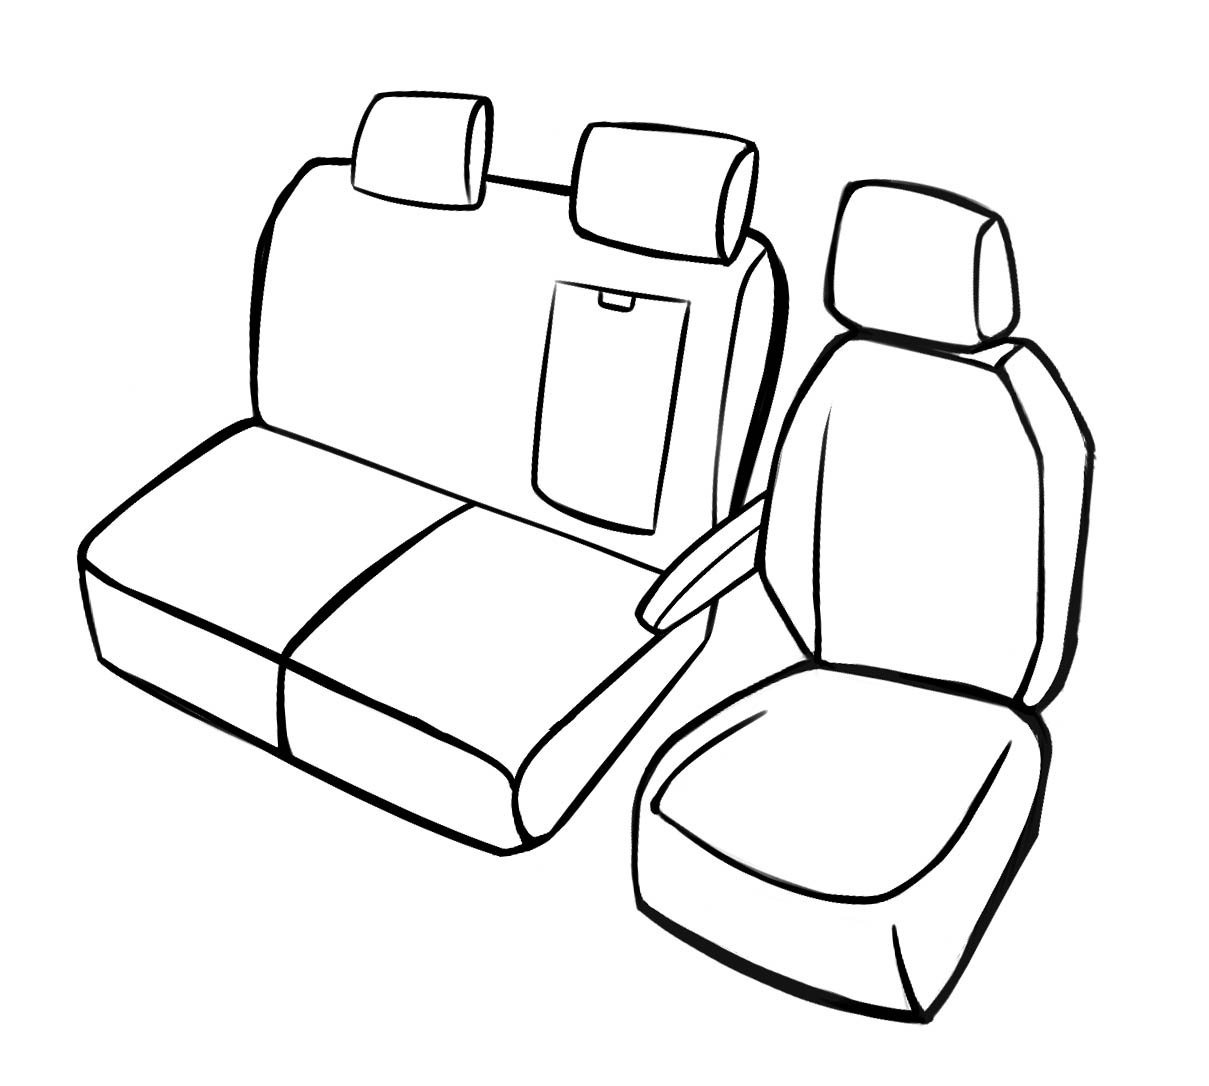 Premium Seat Cover for Ford Transit 2013-Today, 1 single seat cover front, 1 double bench cover